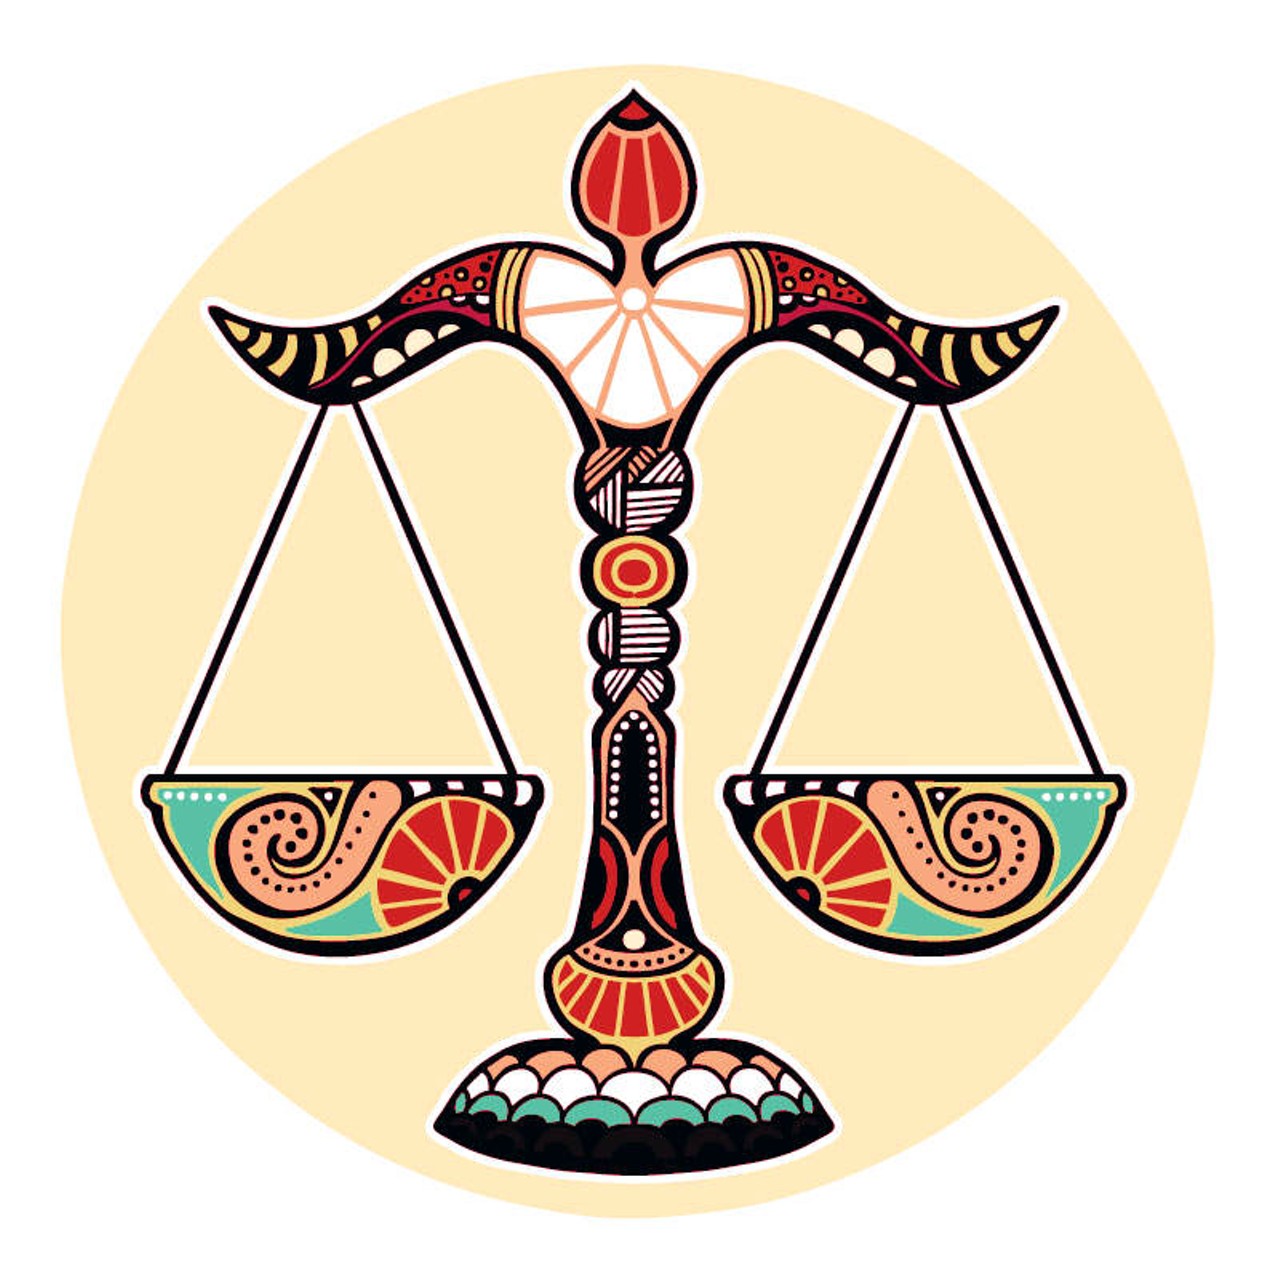 LIBRA: Sept. 21 &#150; Oct. 20
Nobody gets to you the way a certain so-and-so gets to you. And this is either feeling bad or good depending on where you stand with each other. In some ways it&#146;s OK to care this much or be this involved. On another level it&#146;s gotten to the point where you could use some time and enough distance to return to yourself. Lots of things have shifted in the last few months. What matters now looks a lot different than it did before things got so intense. One way or another, you could use a break and a little time to figure out where you&#146;re really at with yourself.